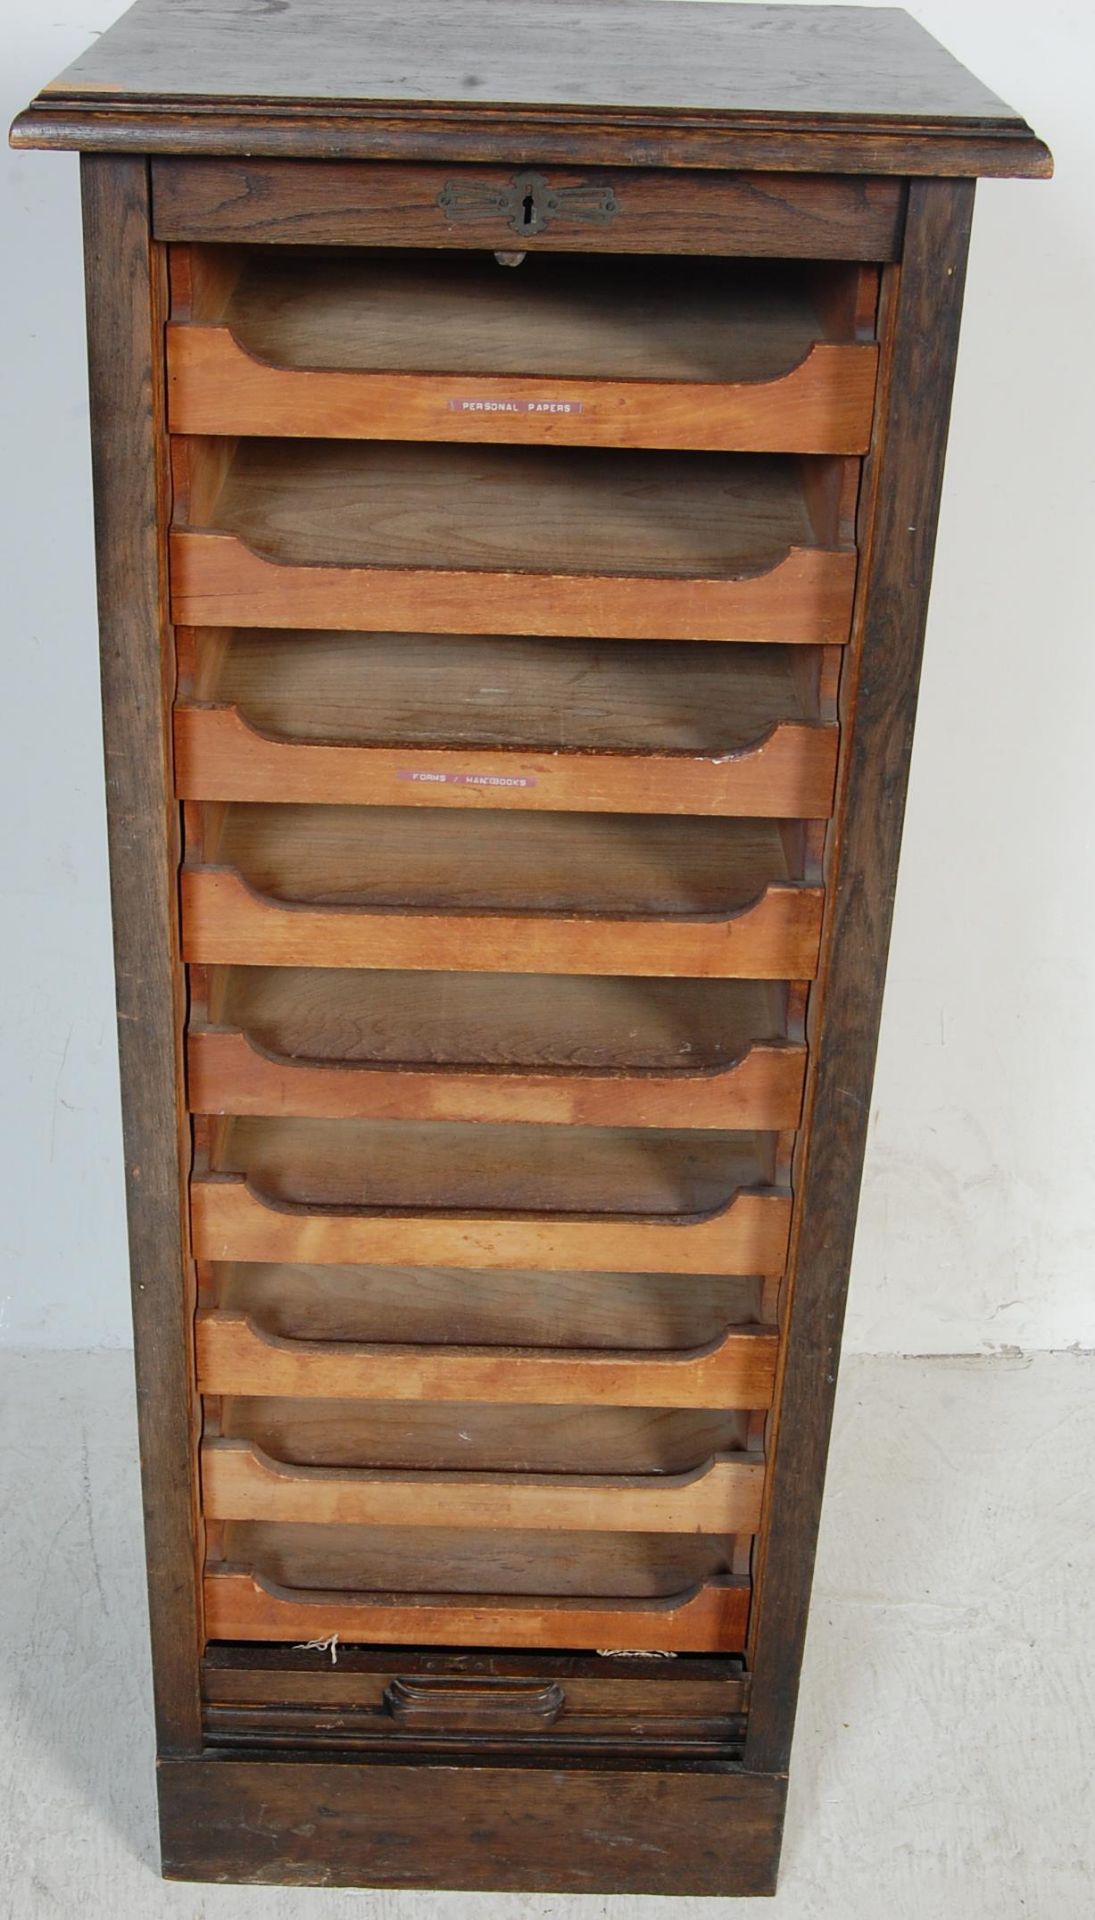 EARLY 20TH CENTURY ART DECO TAMBOUR ROLL RILING CABINET - Image 4 of 6